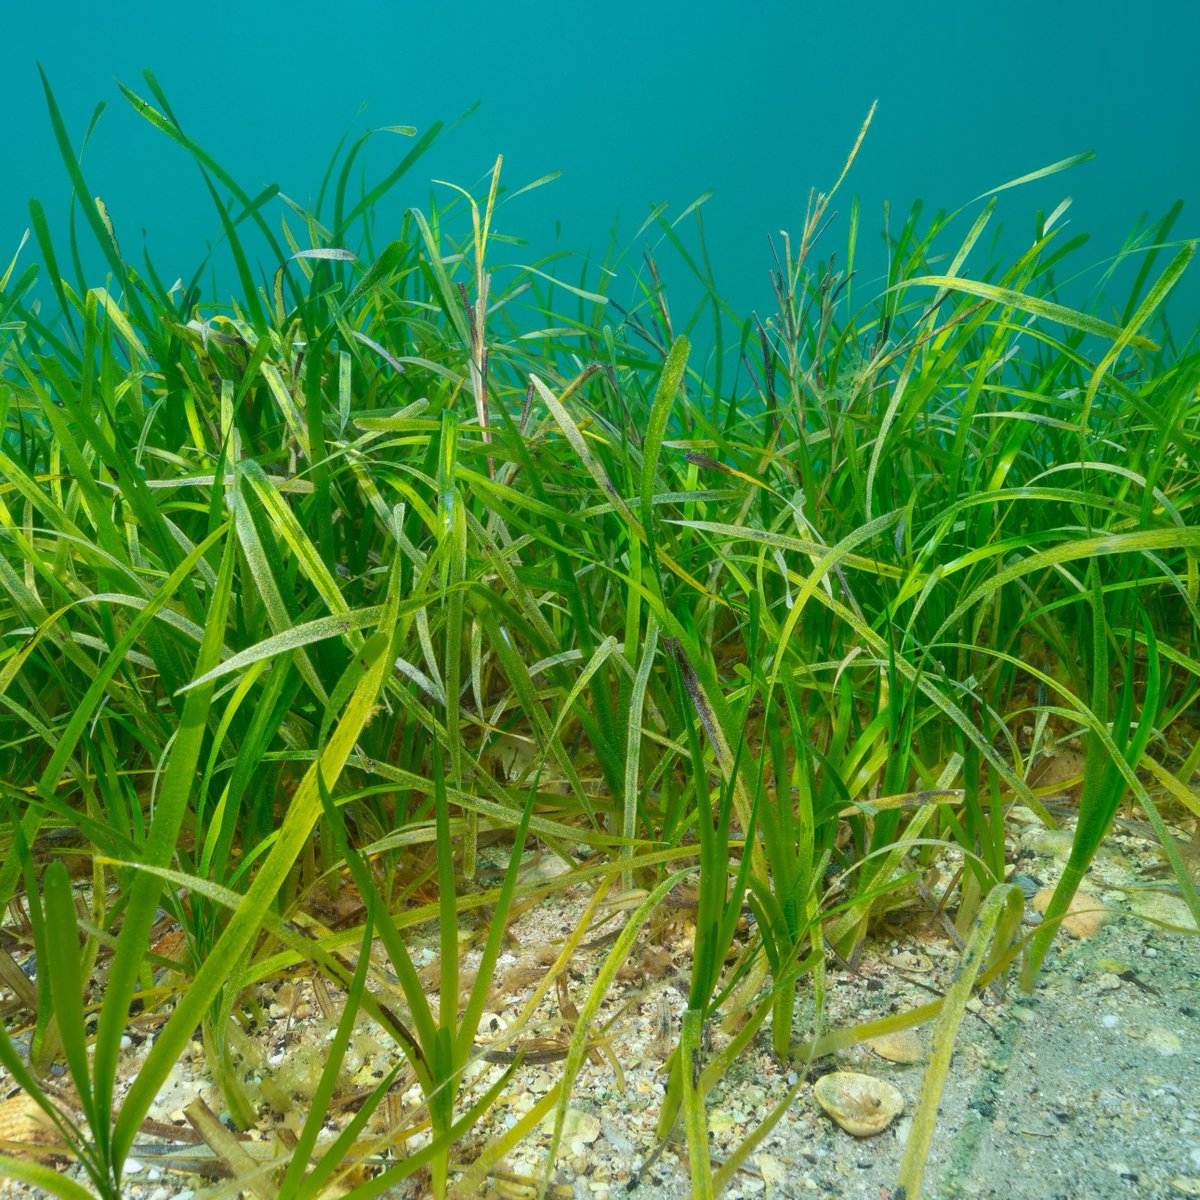 Today is World Seagrass Day – a United Nations special day to raise awareness of this mighty marine plant. Seagrasses are found in shallow waters in many parts of the world: find out about the Solent Seagrass Restoration Project via @HantsIWWildlife: bit.ly/49SuE5G